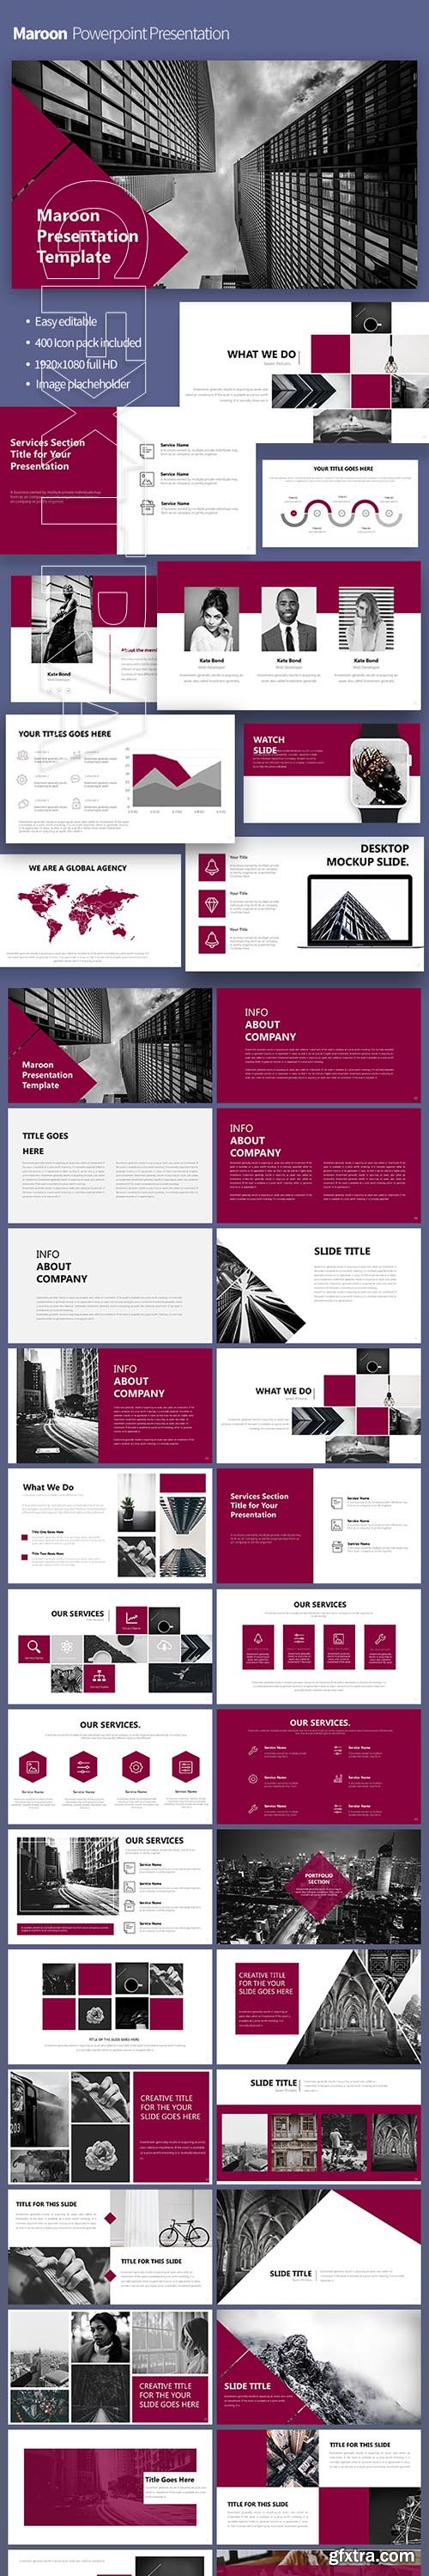 GraphicRiver - Maroon Powerpoint Template 22305396